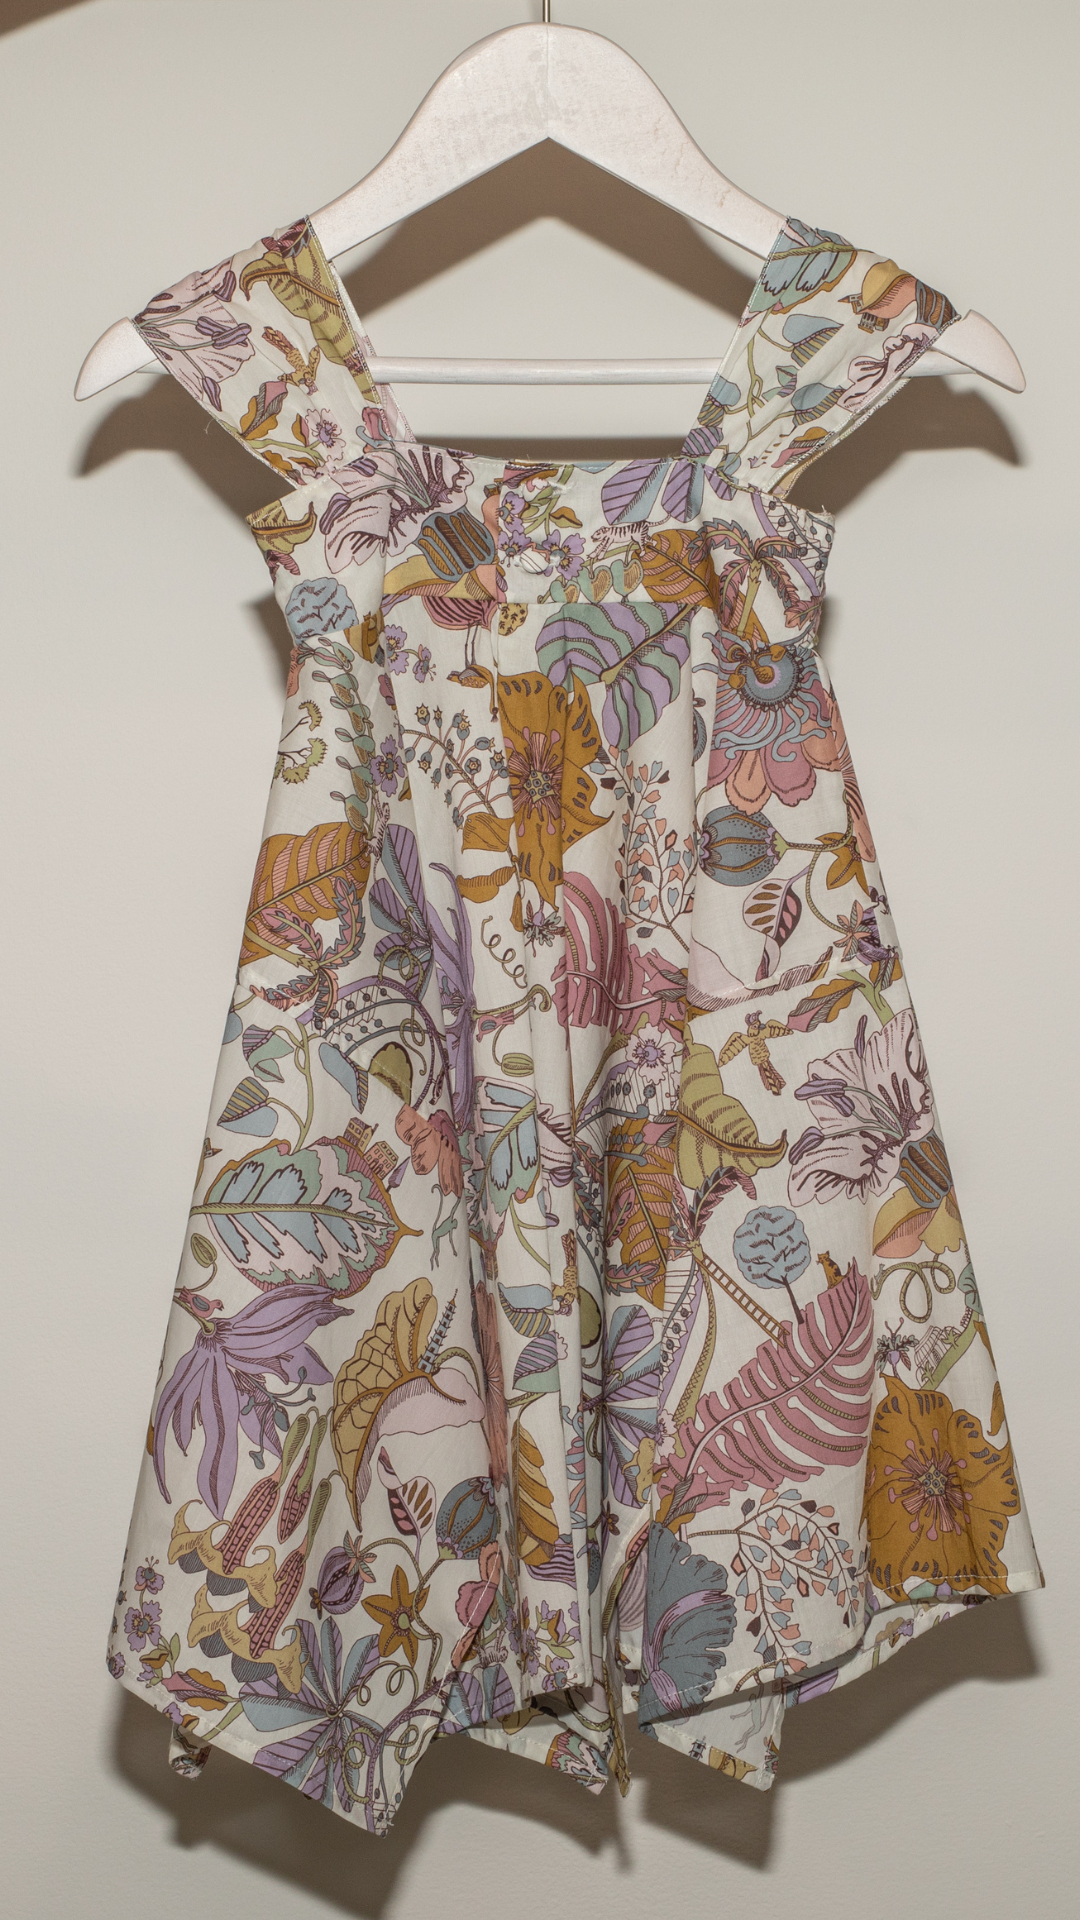 ASYMMETRIC STRAPPY HAND EMBROIDERED DRESS IN VIOLET LIBERTY FABRIC